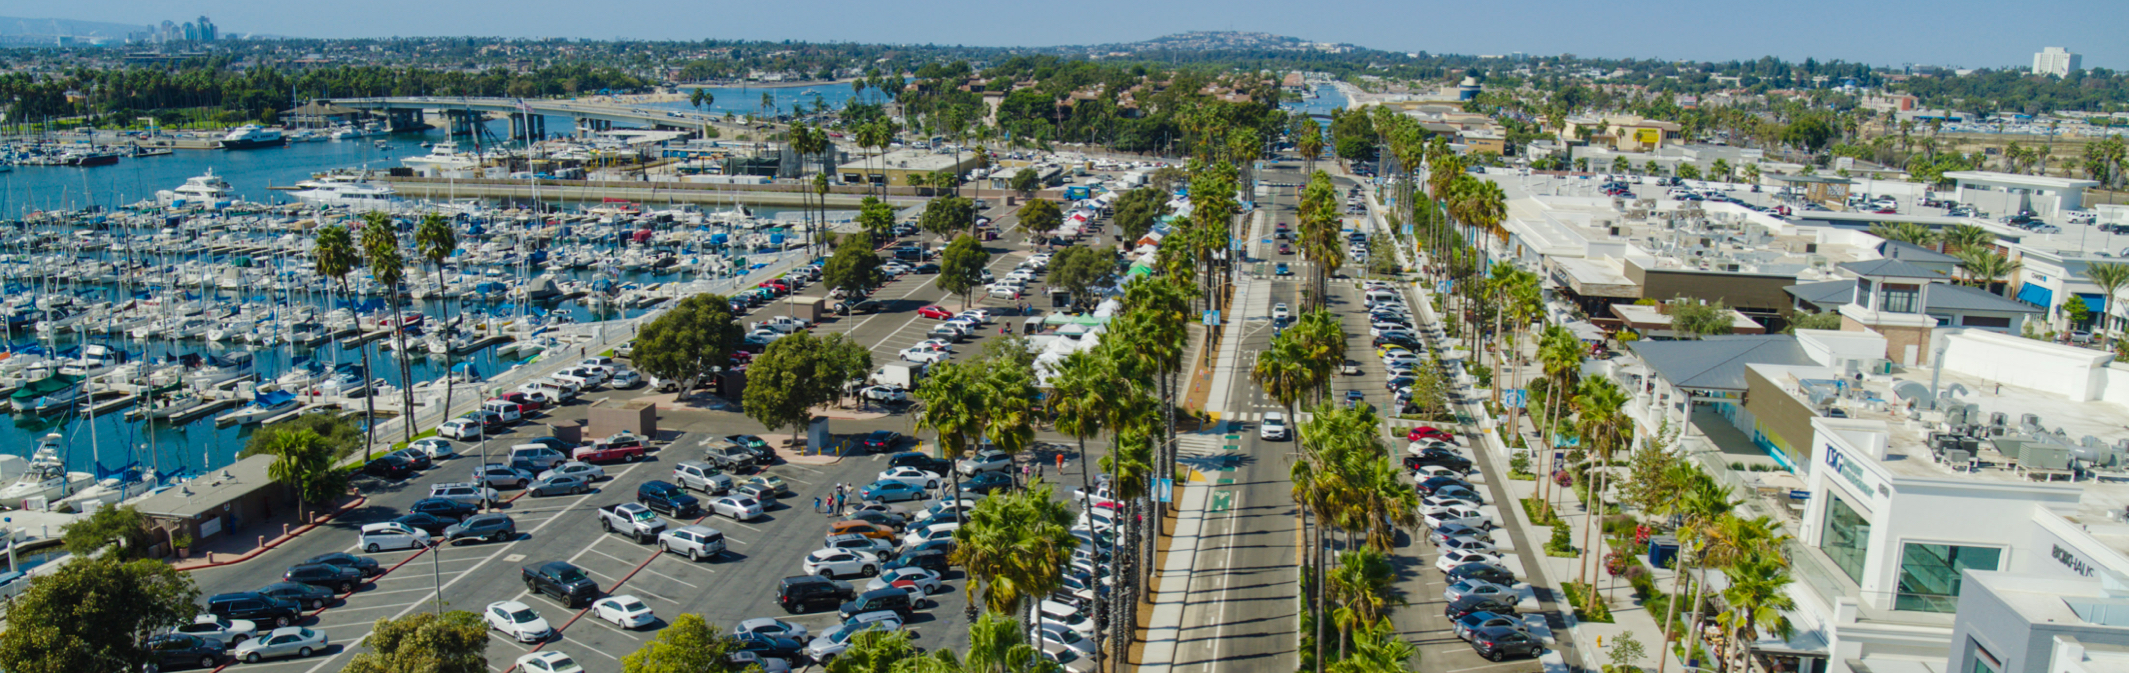 2nd&PCH-Leasing Outdoor Aerial View